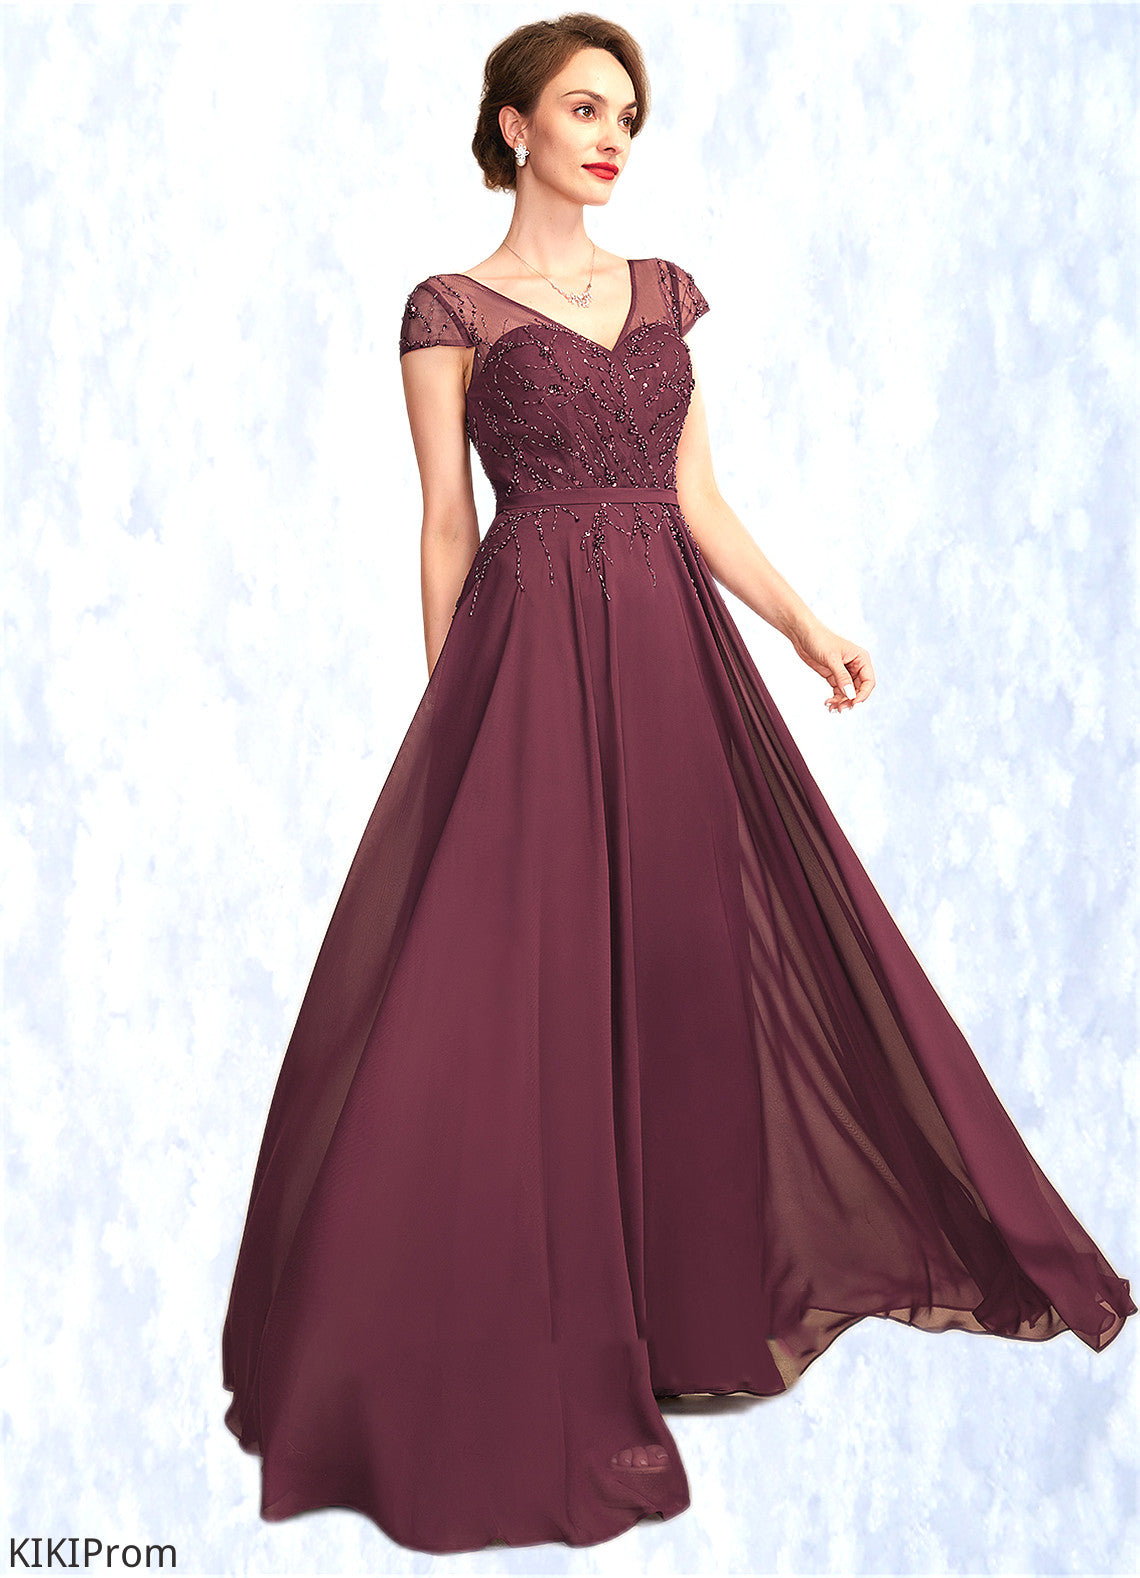 Maya A-Line V-neck Floor-Length Chiffon Mother of the Bride Dress With Beading Sequins DZ126P0015028